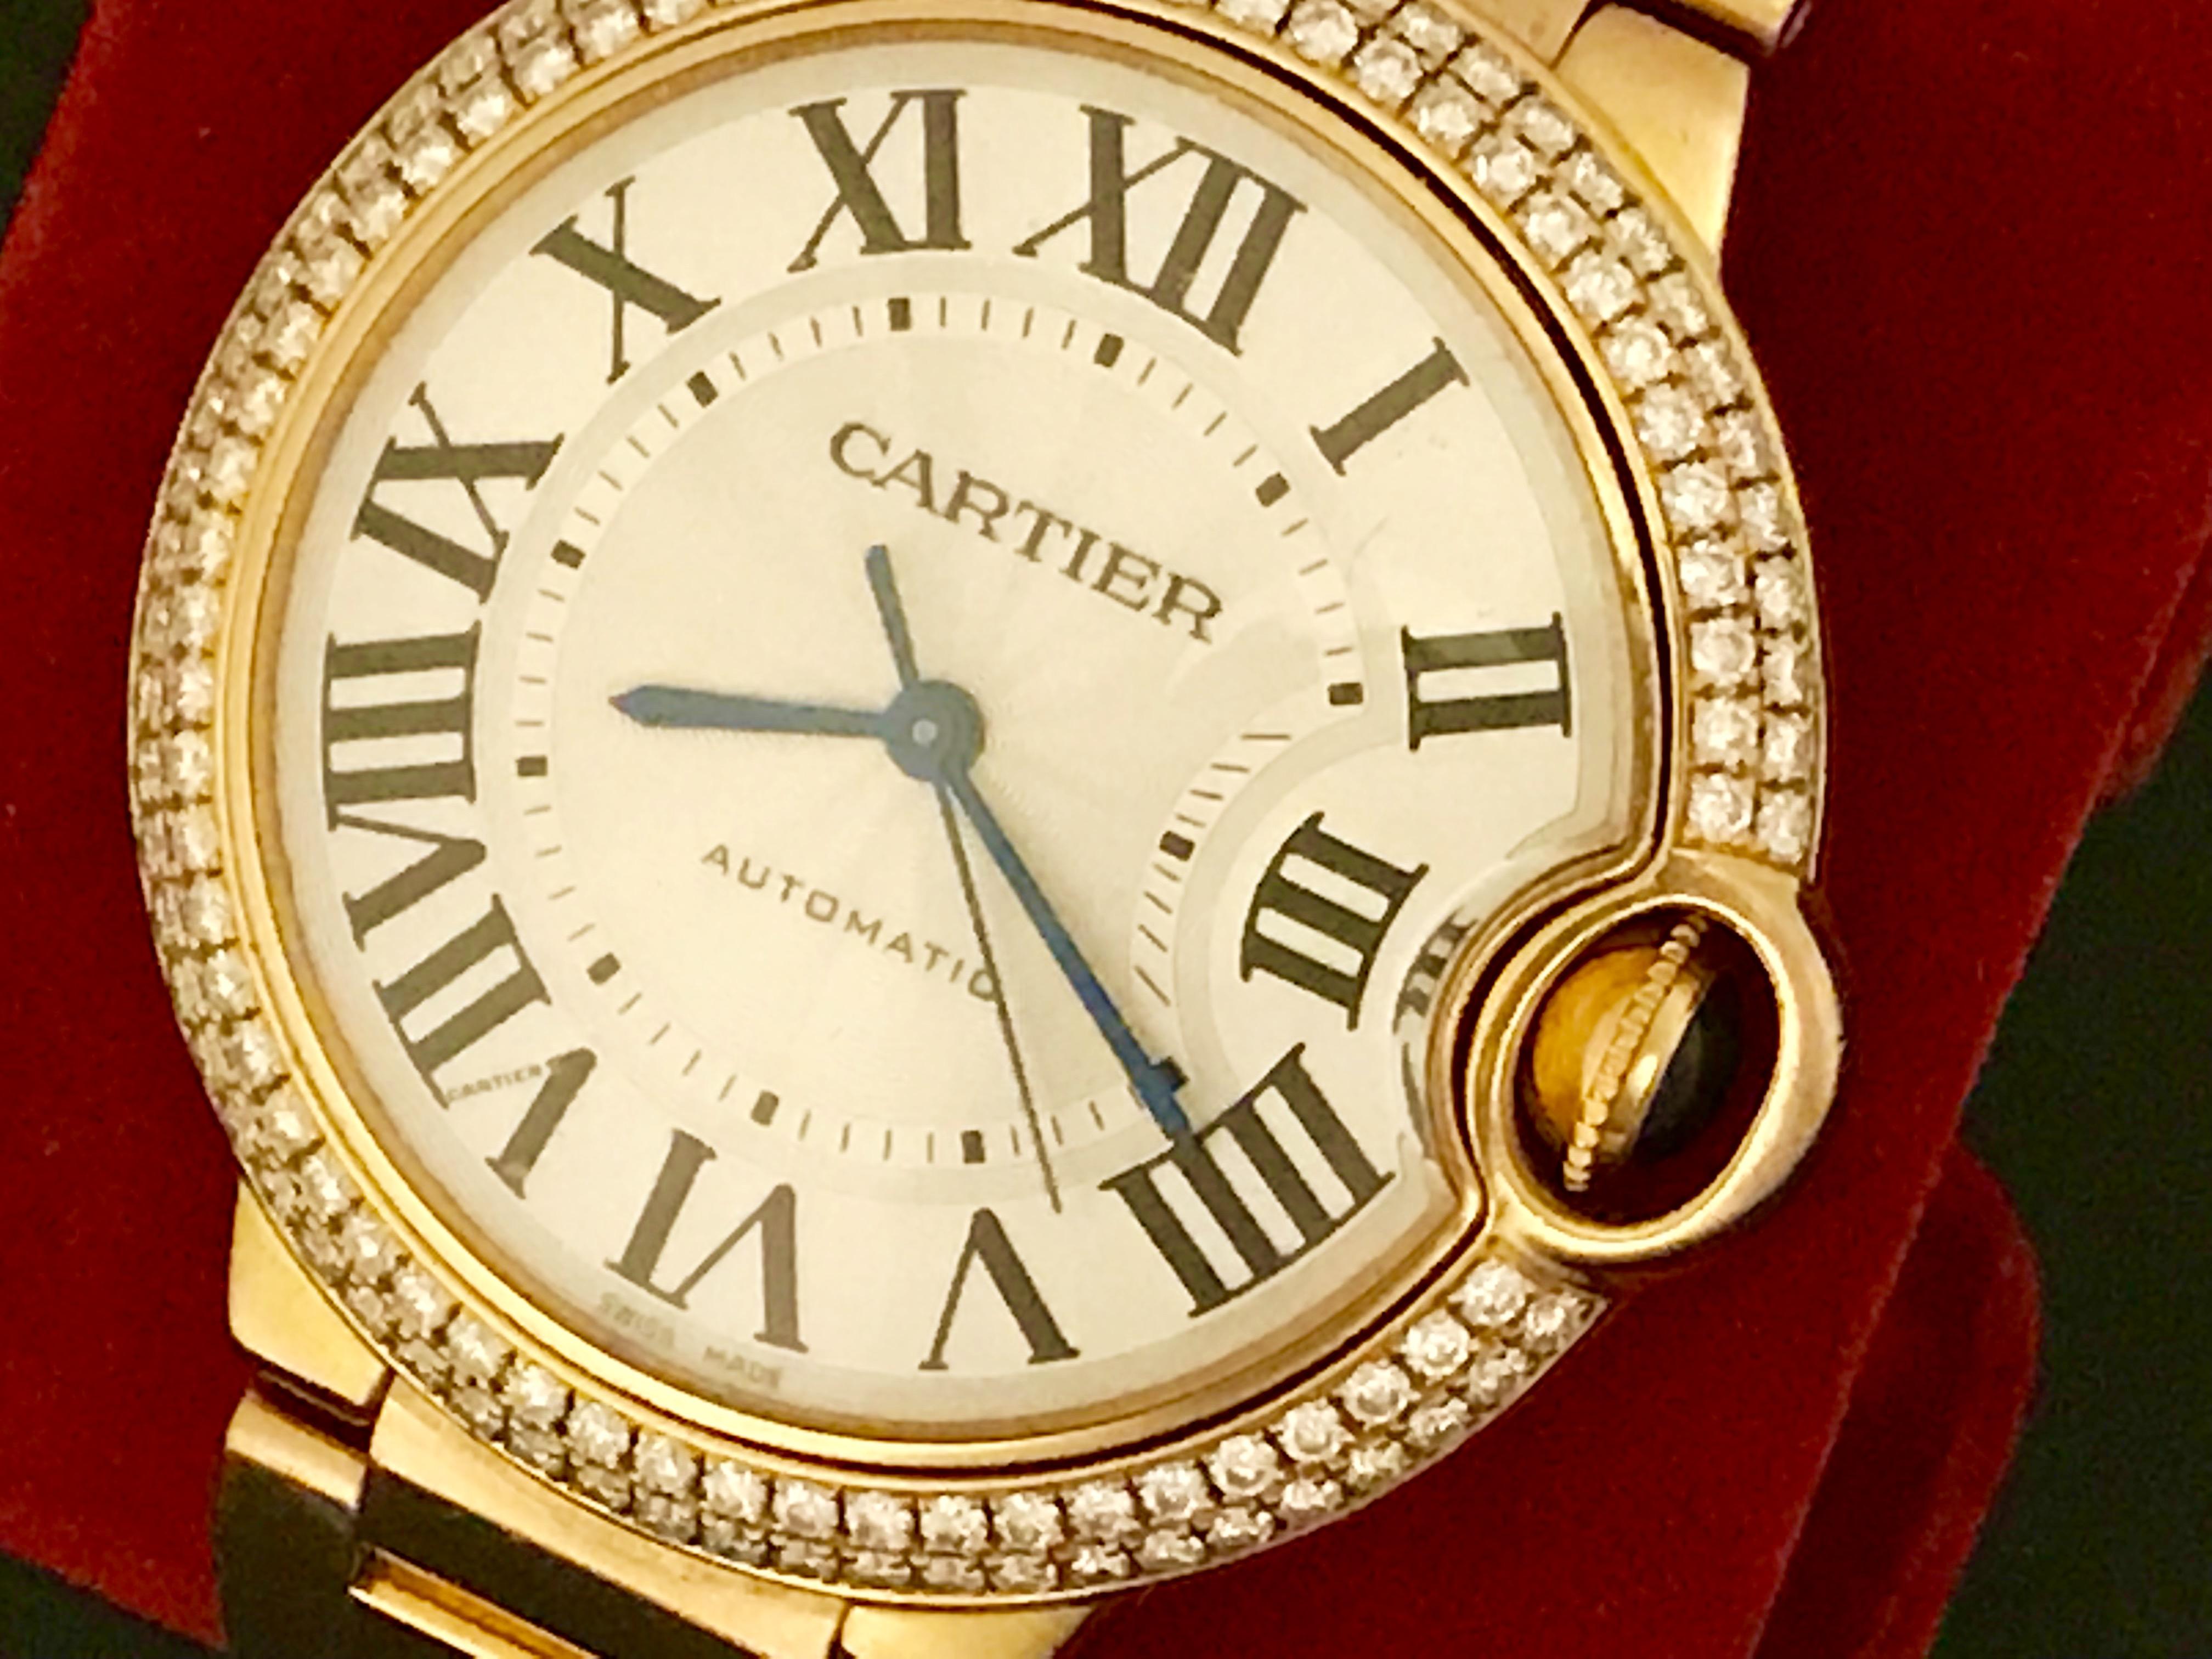 Cartier 18k Rose Gold Ballon Bleu Automatic Midsize Wrist Watch. Model WE900551. Silvered guilloche Dial with black Roman numerals, 18k Rose Gold round style case with two-row Cartier Diamond bezel (36mm dia.). Water Resistant to 30 Meters - 100